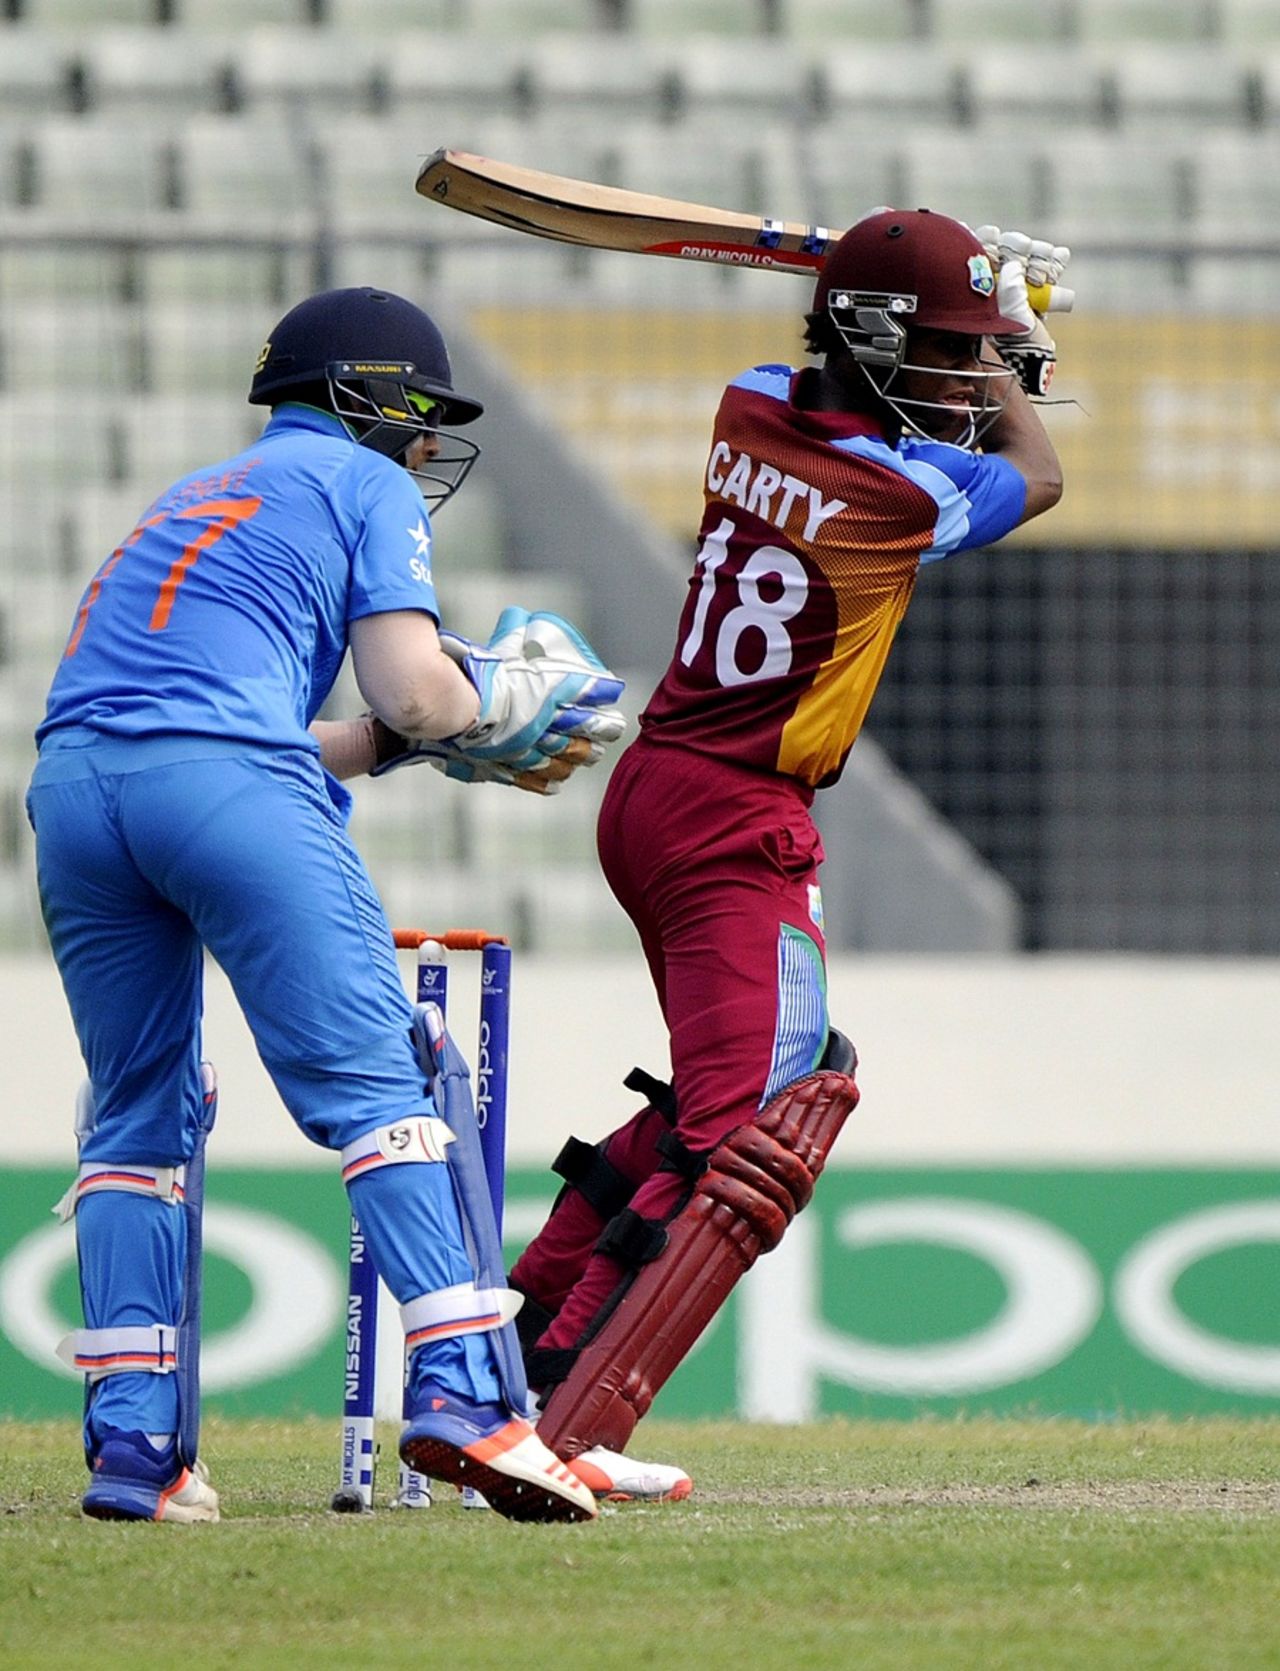 Keacy Carty plays a cut, India v West Indies, final, Under-19 World Cup, Mirpur, February 14, 2016